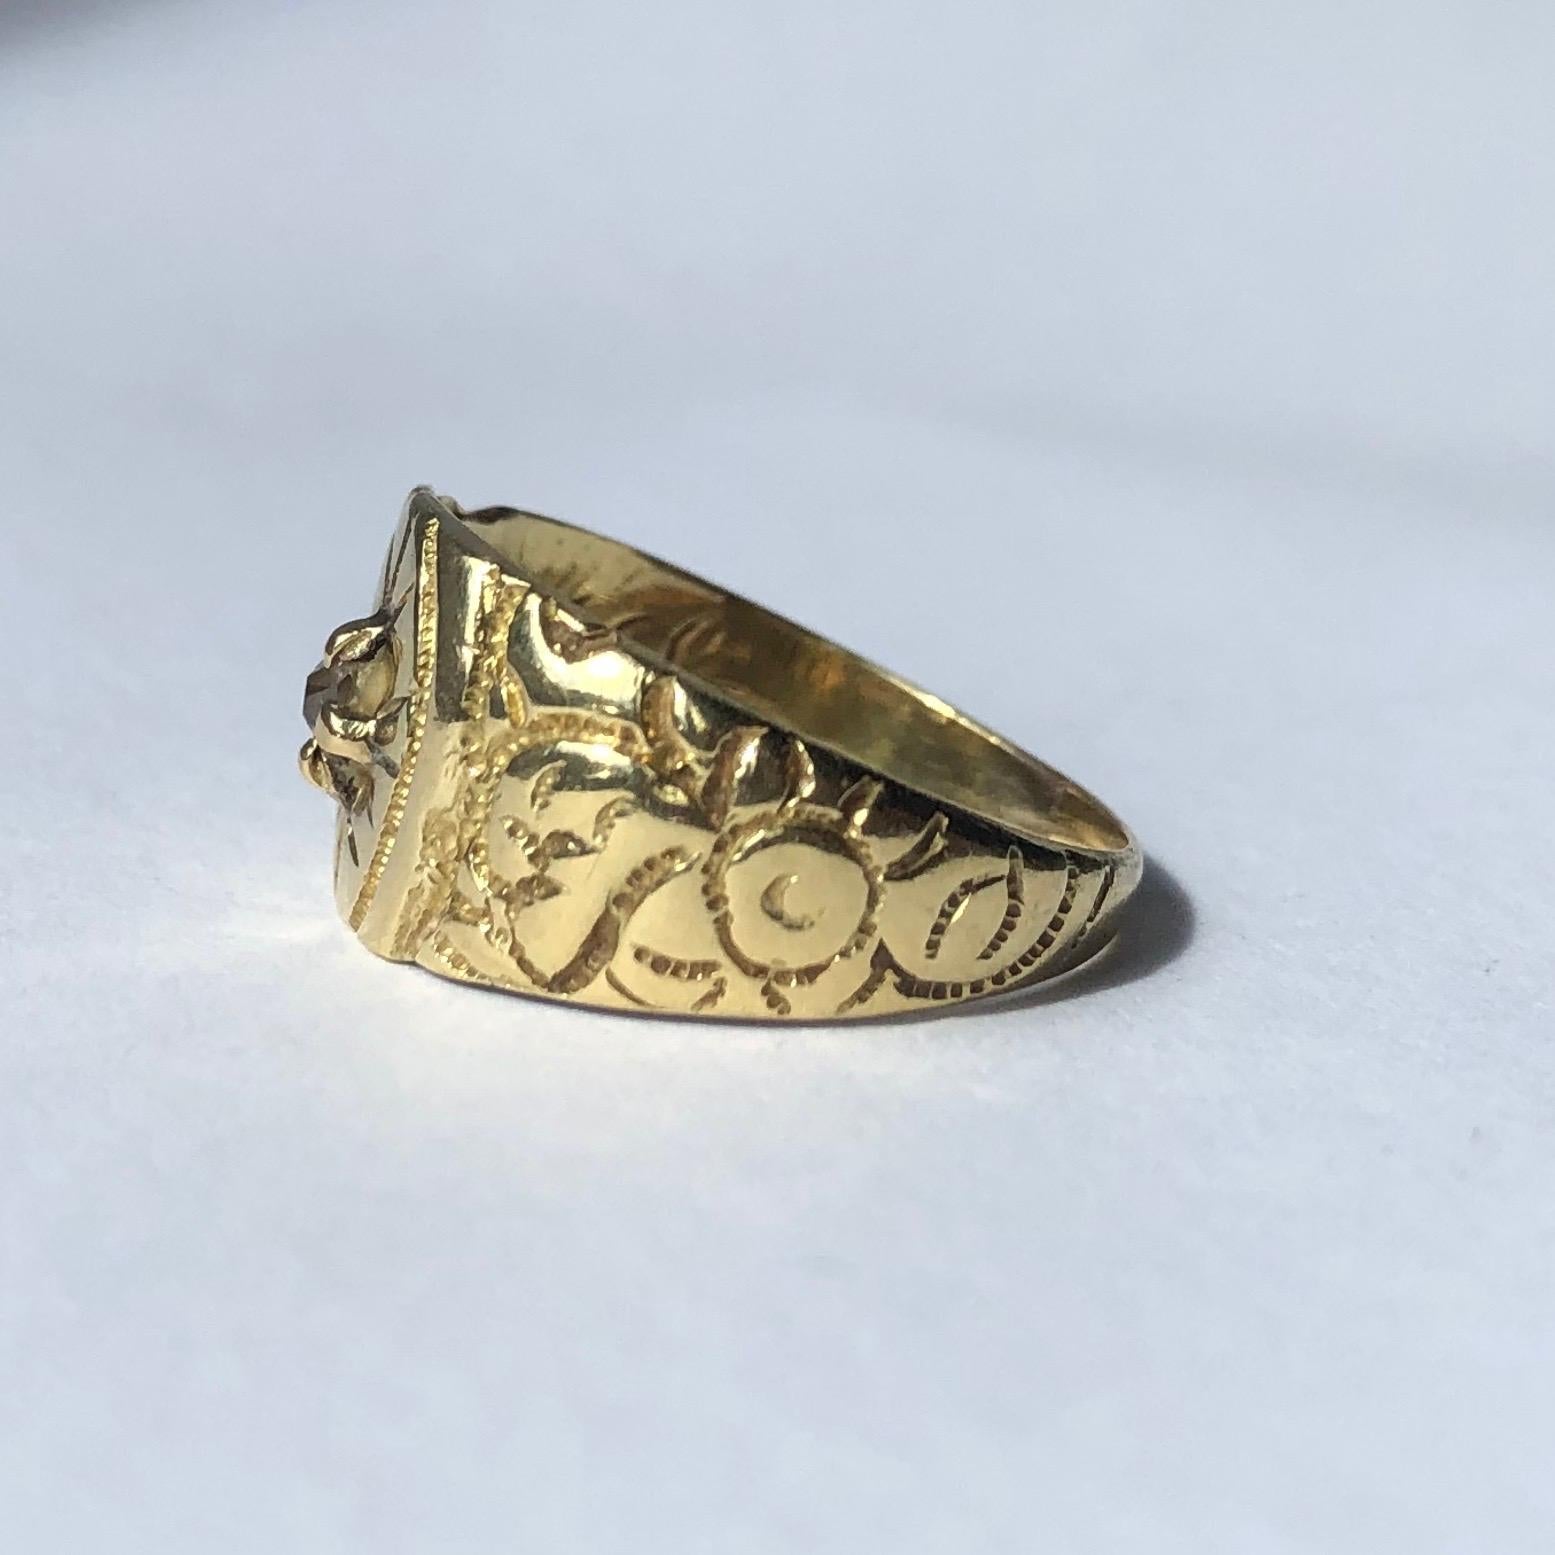 This gorgeous extra wide 18carat gold band has deep engraving on the shoulders and detail around the diamond at the centre. The diamond is sat proud in a claw setting and measures approx 5pts. There is engraving on the inside reading 'W.E.P to